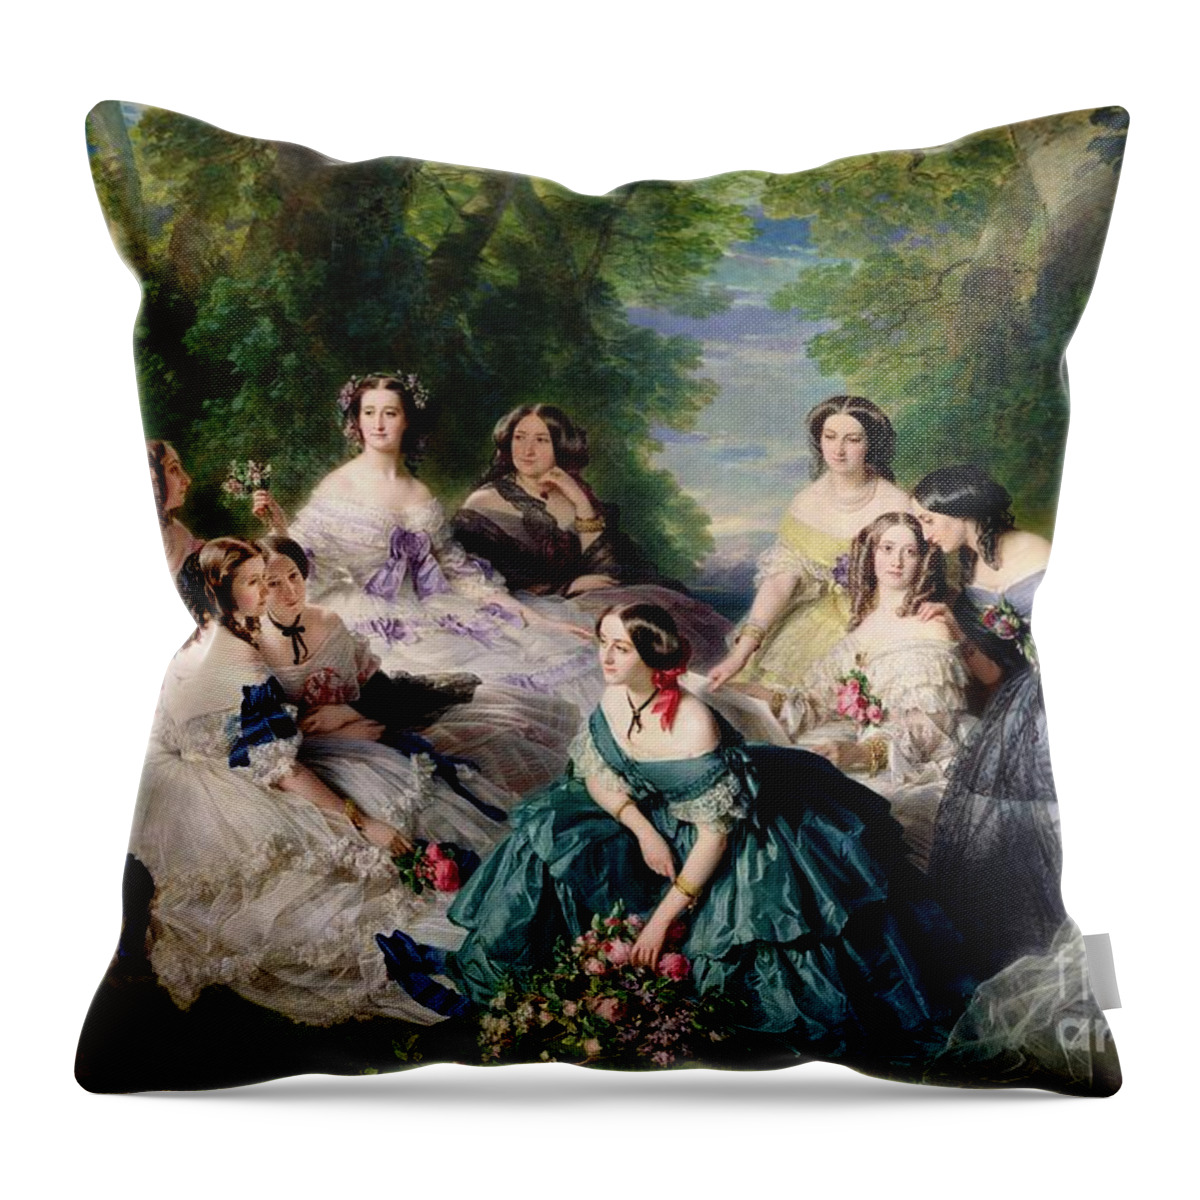 Empress Throw Pillow featuring the painting Empress Eugenie Surrounded by her Ladies in Waiting by Franz Xaver Winterhalter